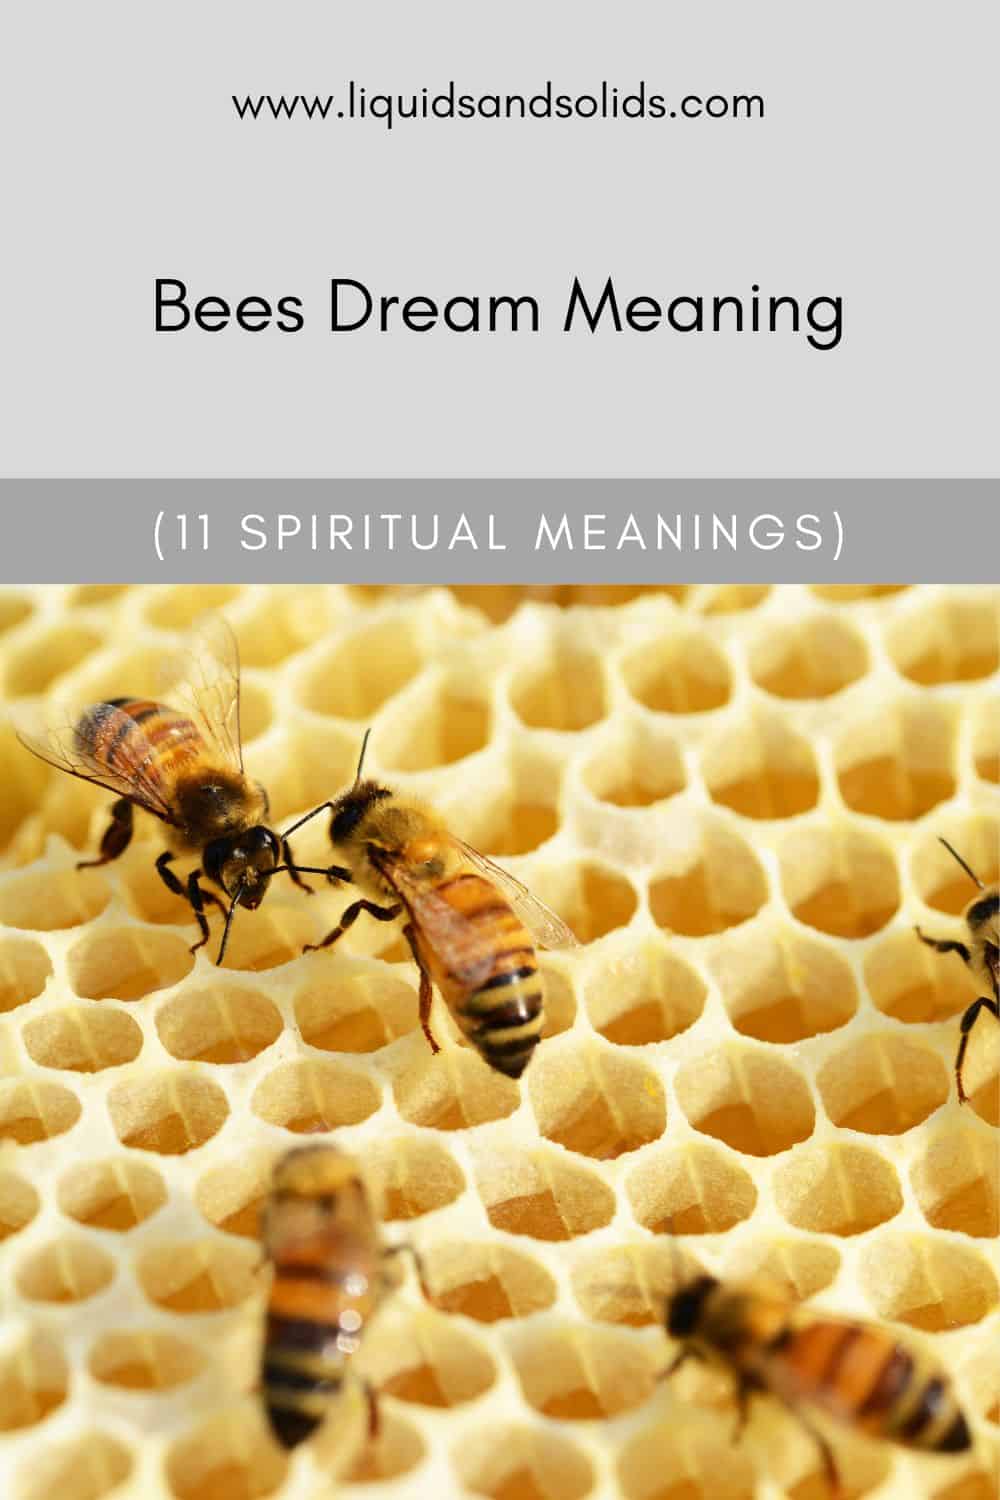 Bees Dream Meaning (11 Spiritual Meanings)